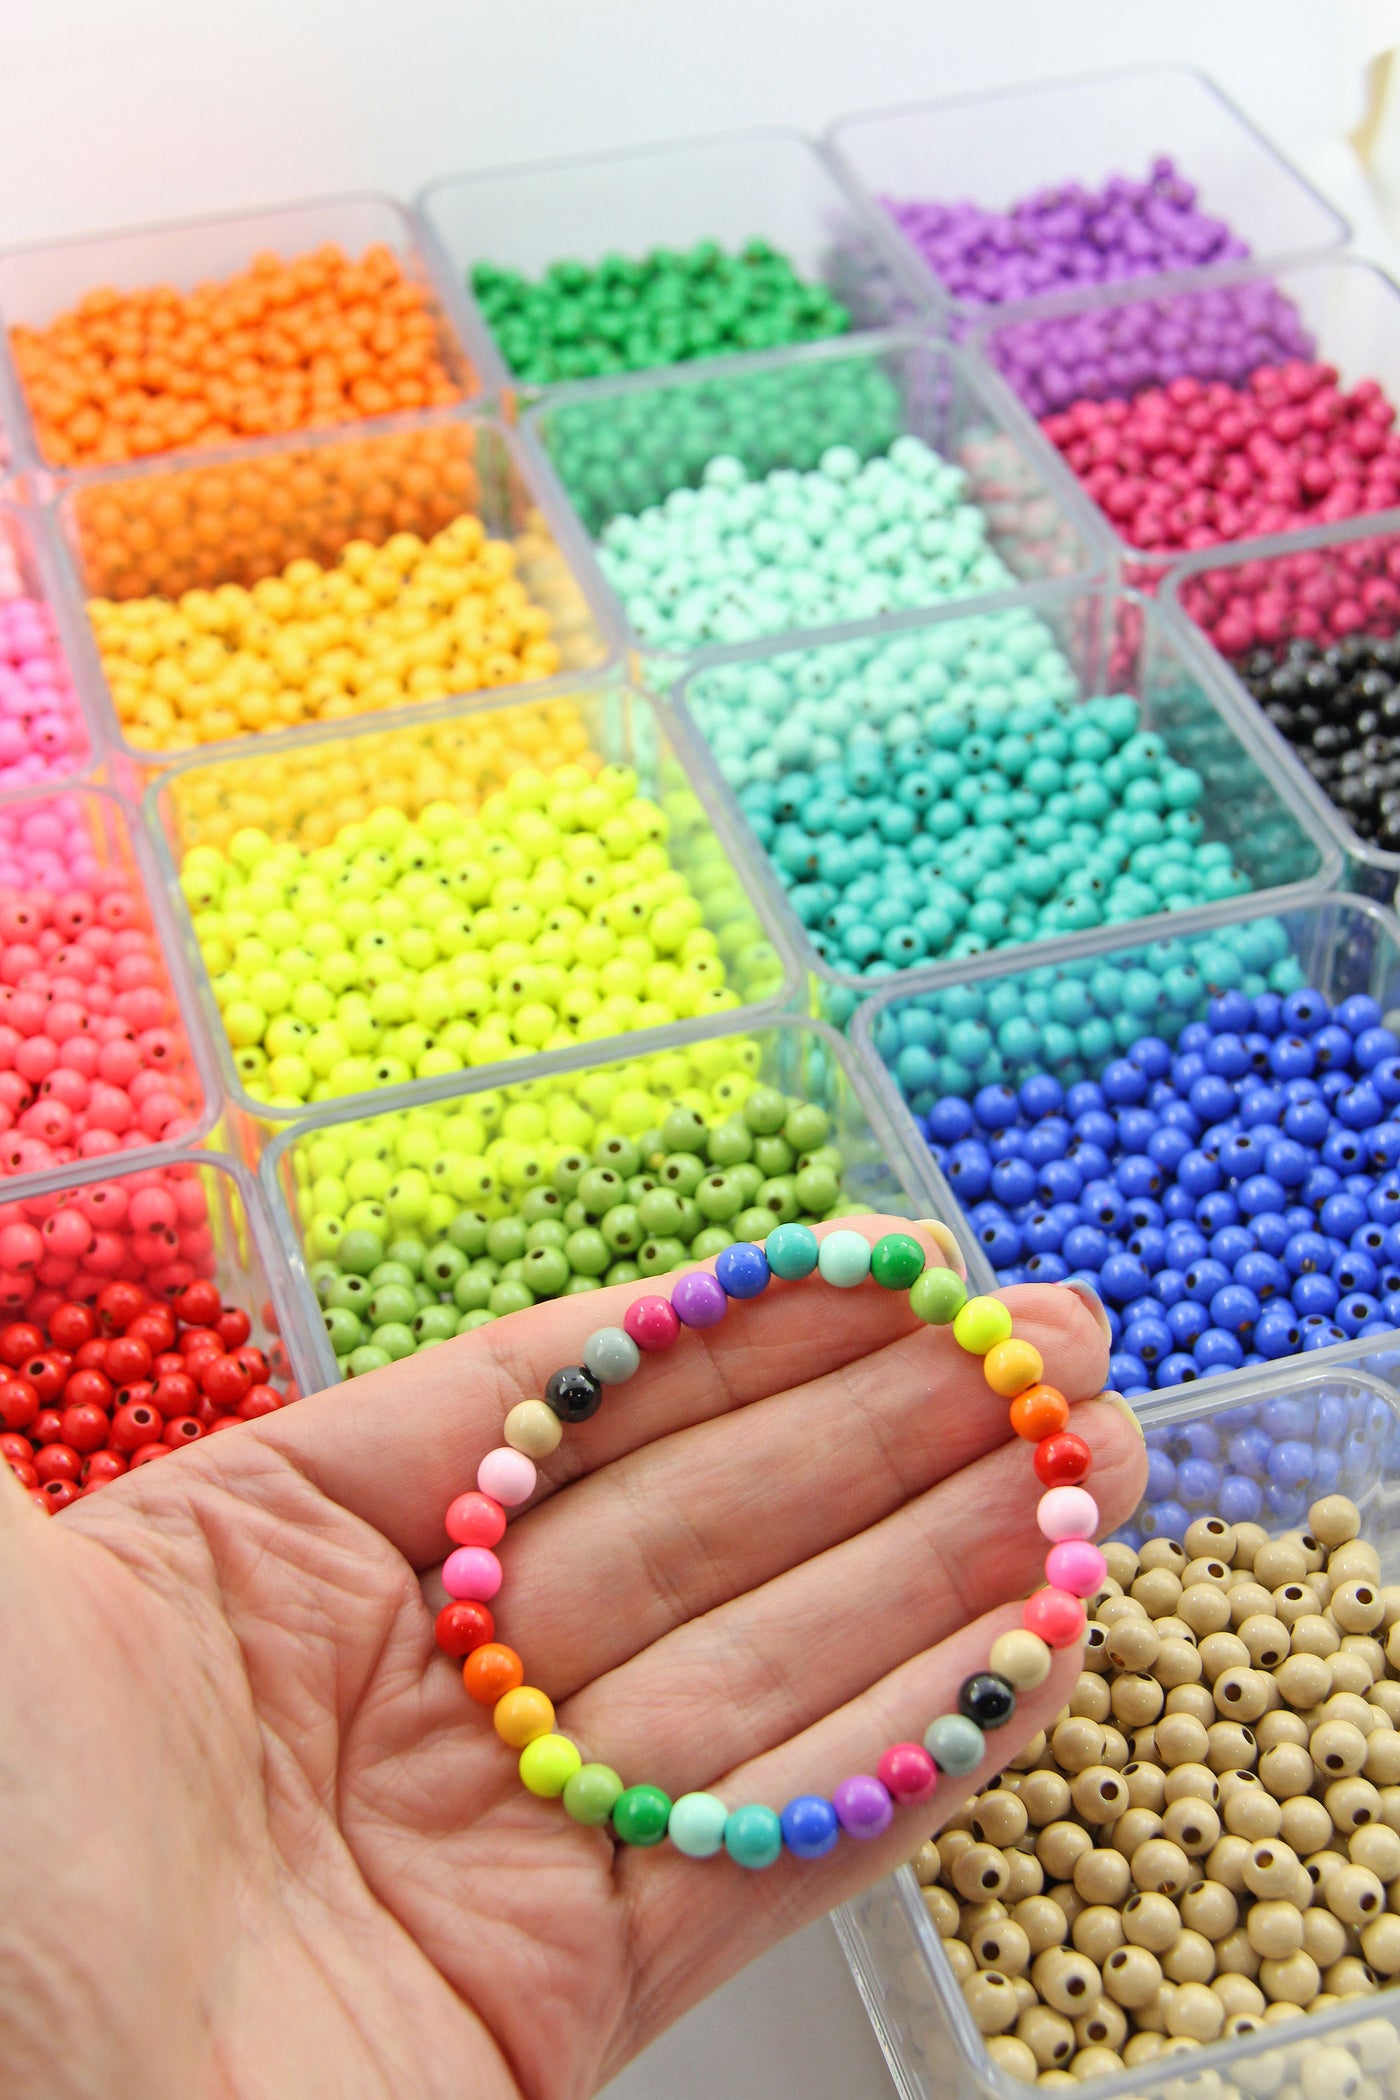 20pcs 5x6mm Tube Enamel Beads Painted Grease Colorful Beads For Bracelets  Making Rainbow Jewelry Making Accessory Supplier - AliExpress